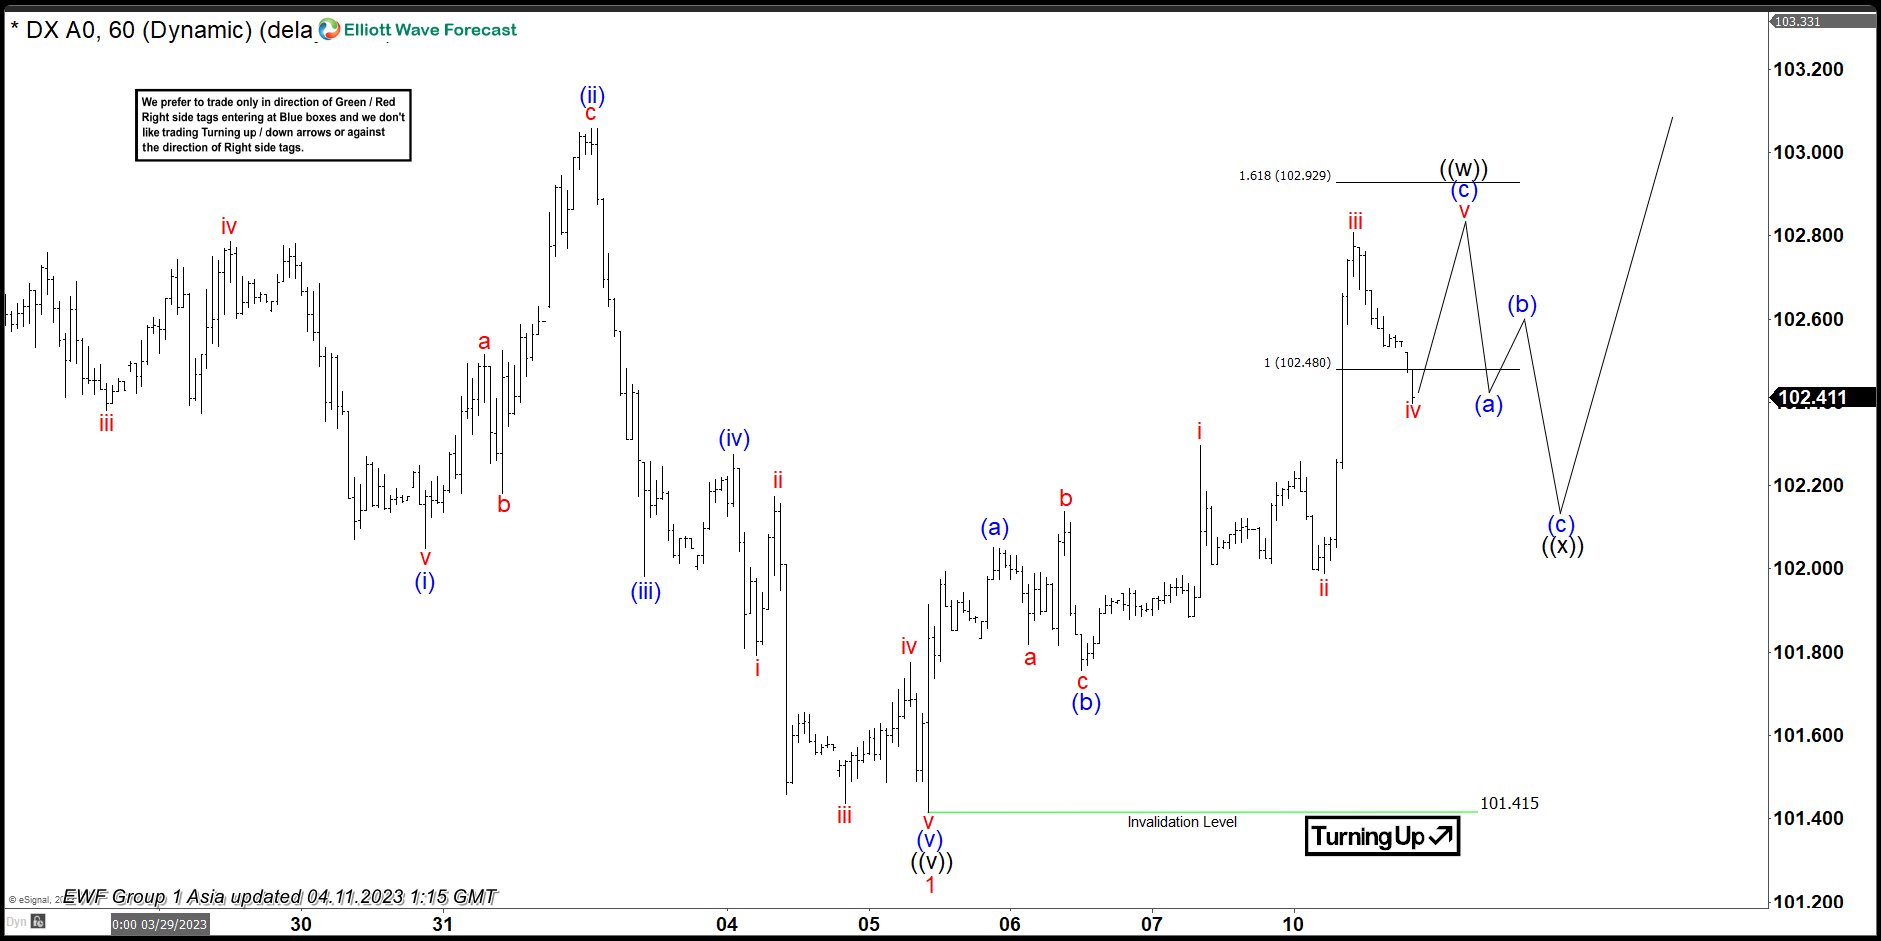 DXY (US Dollar) Elliott Wave Sequence Favors Lower